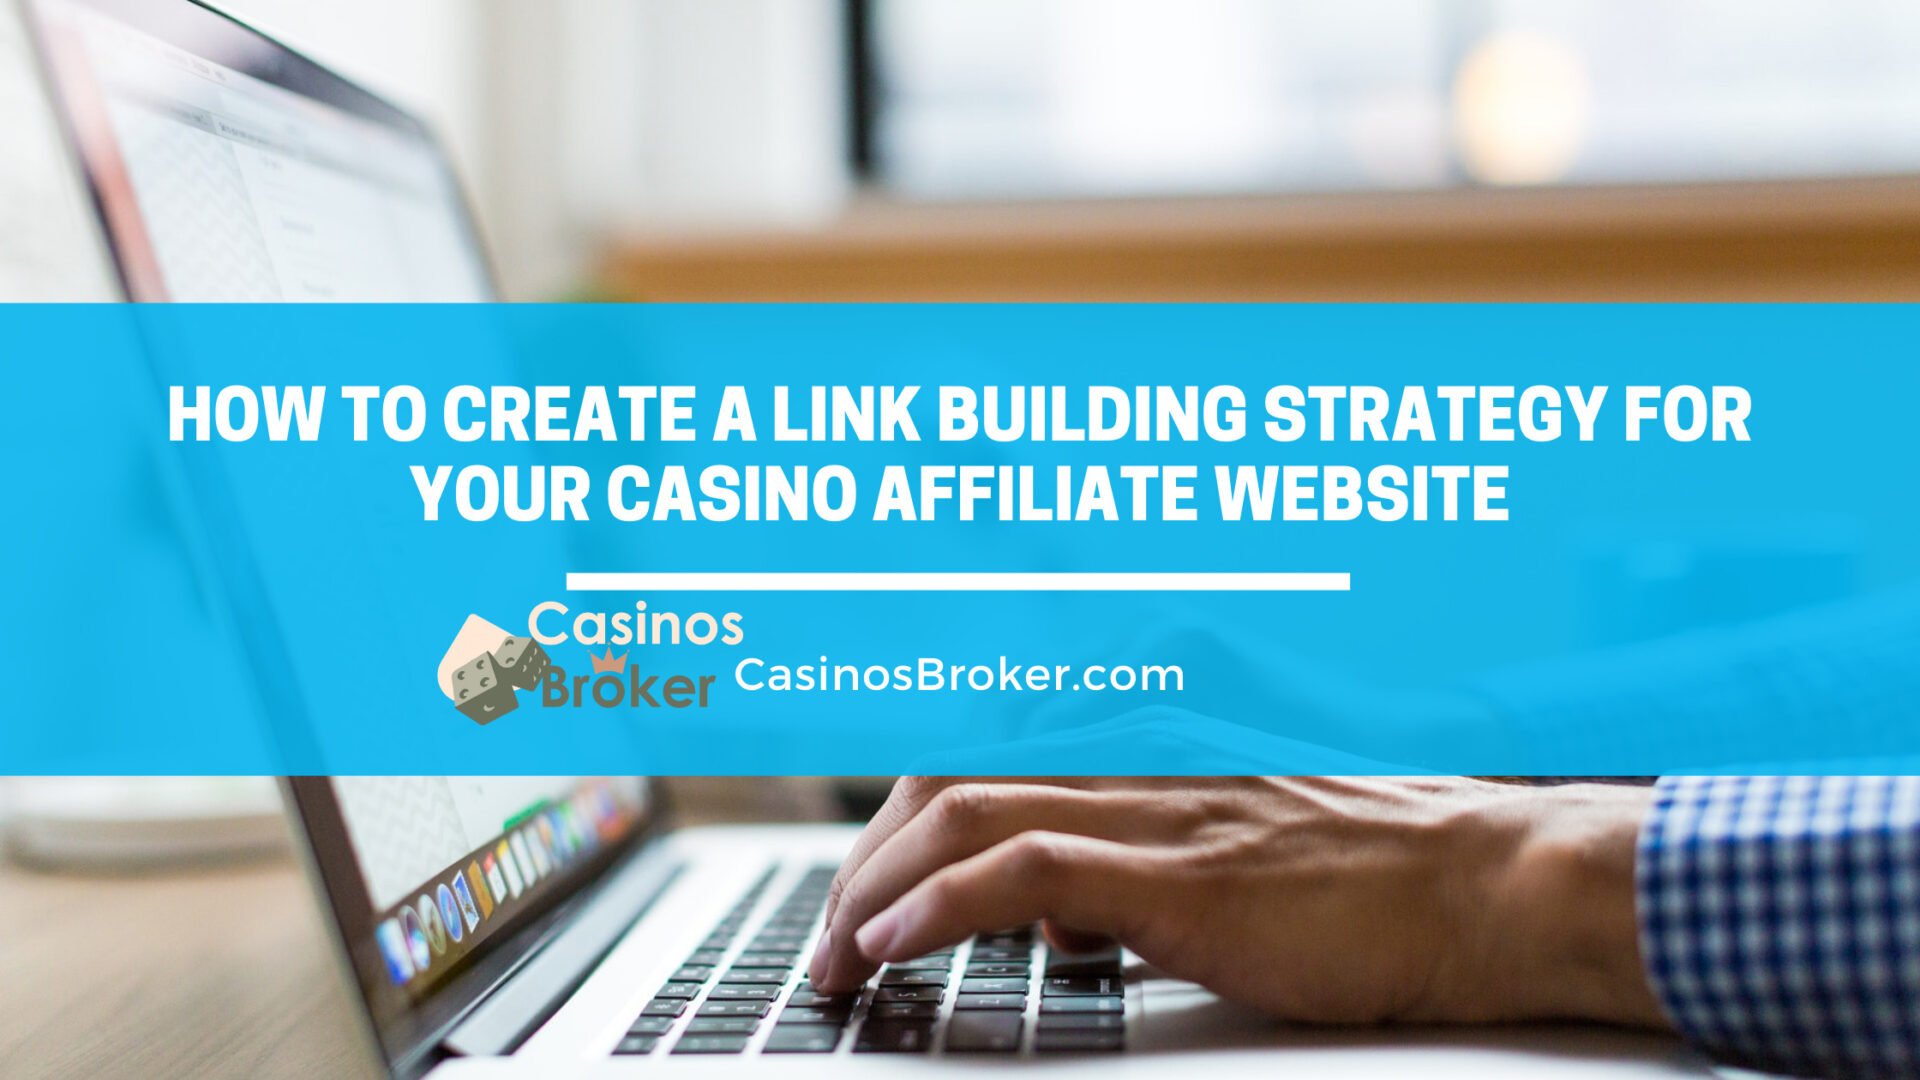 How to Create a Link Building Strategy for Your Casino Affiliate Website